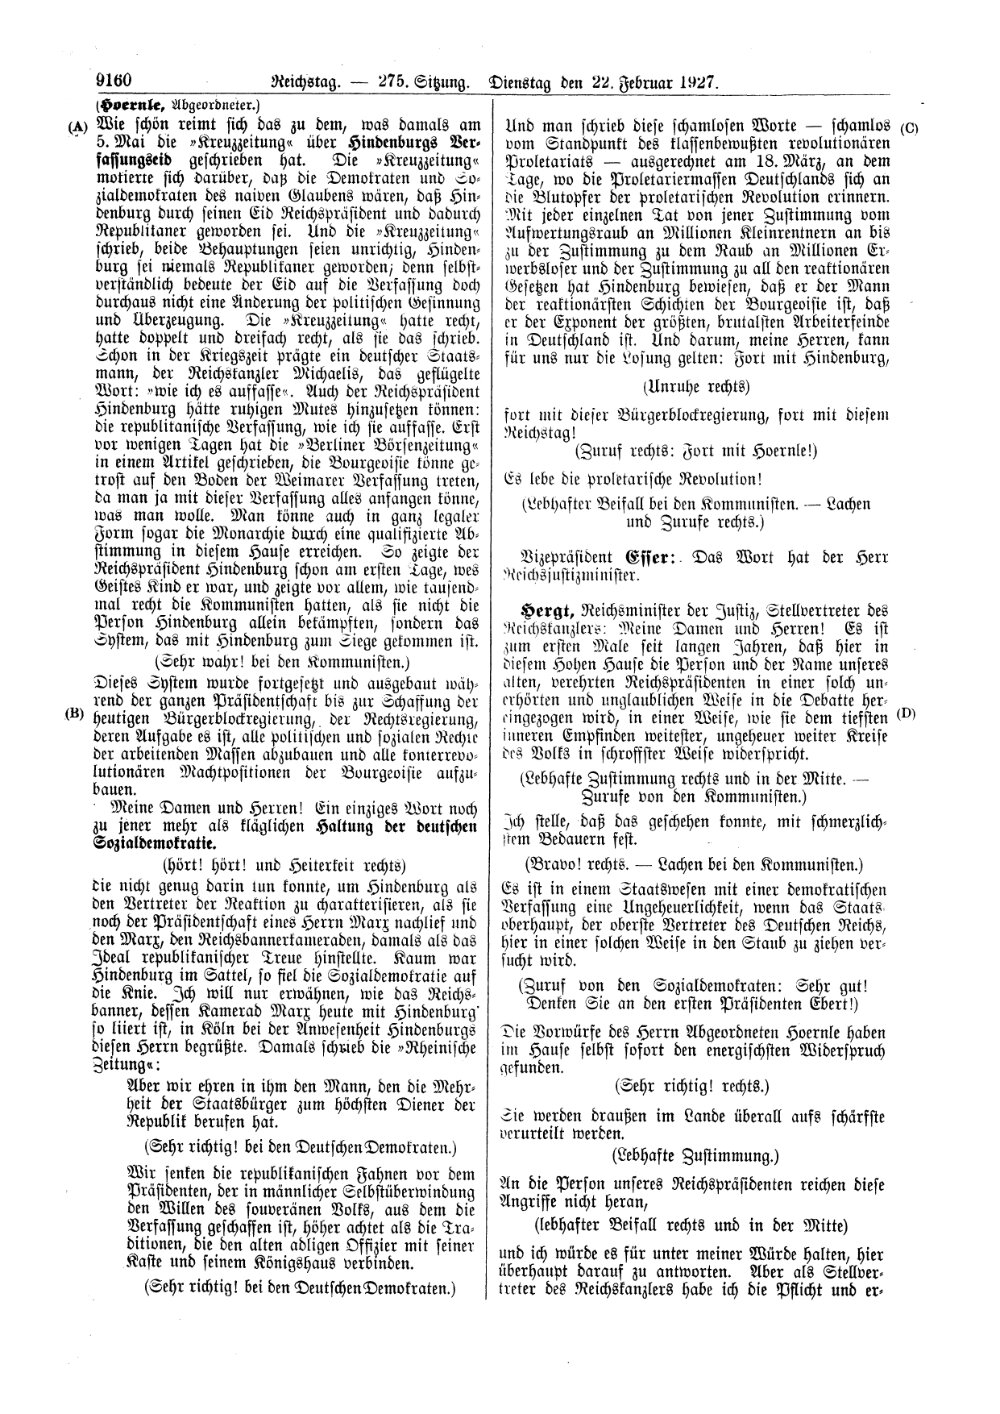 Scan of page 9160